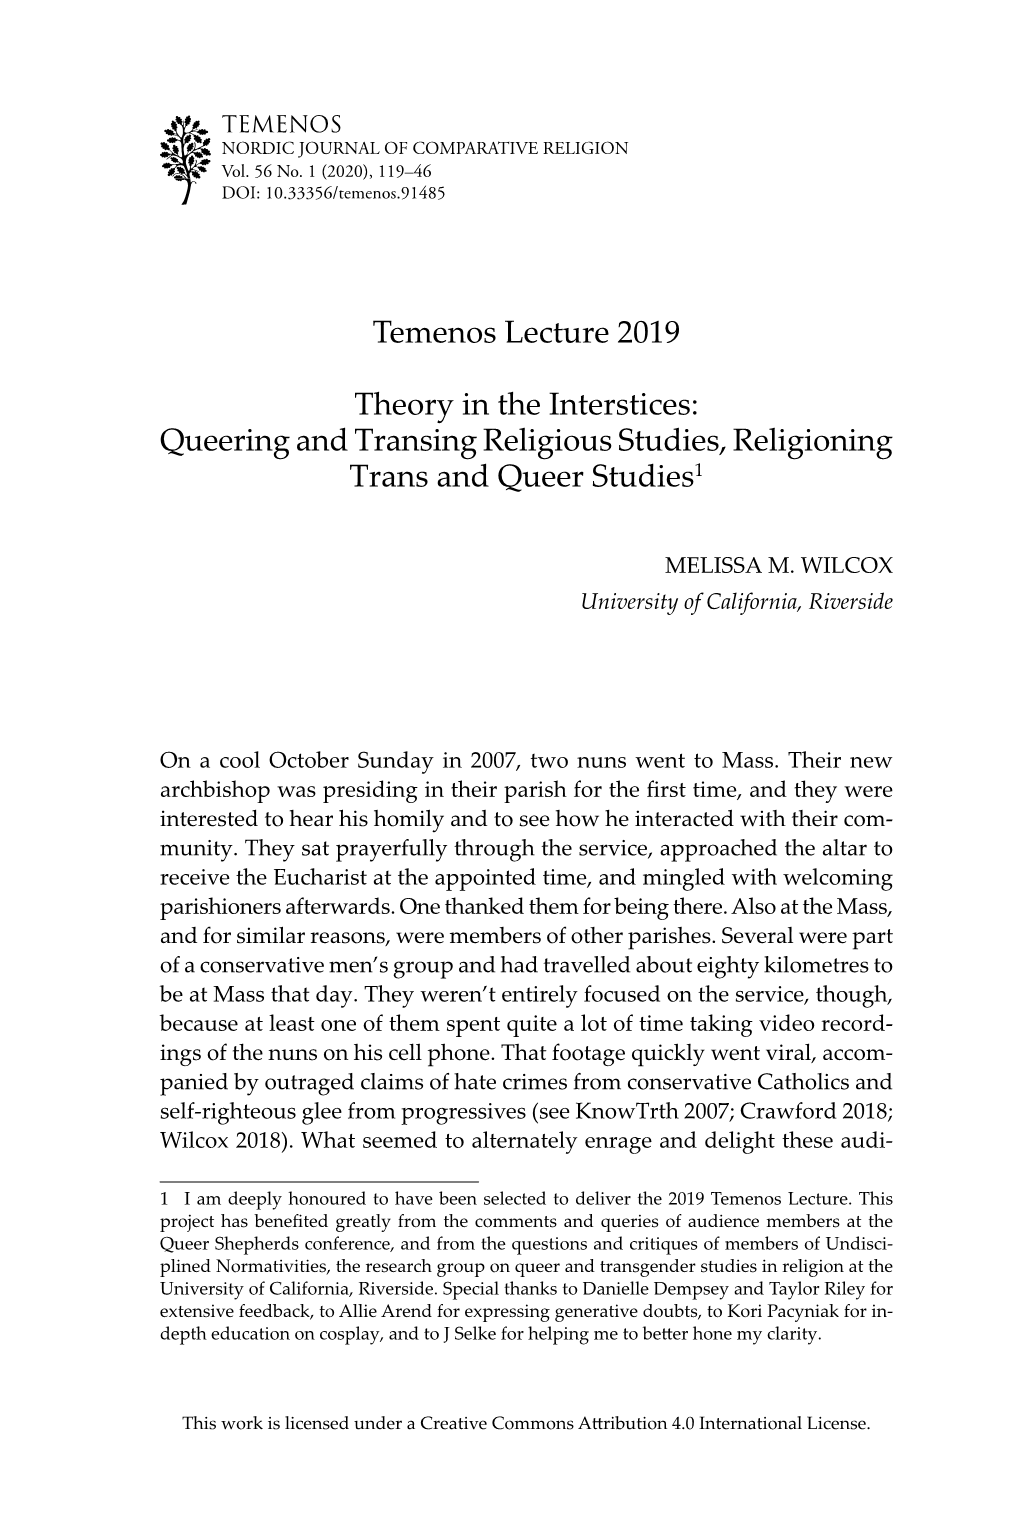 Temenos Lecture 2019 Theory in the Interstices: Queering